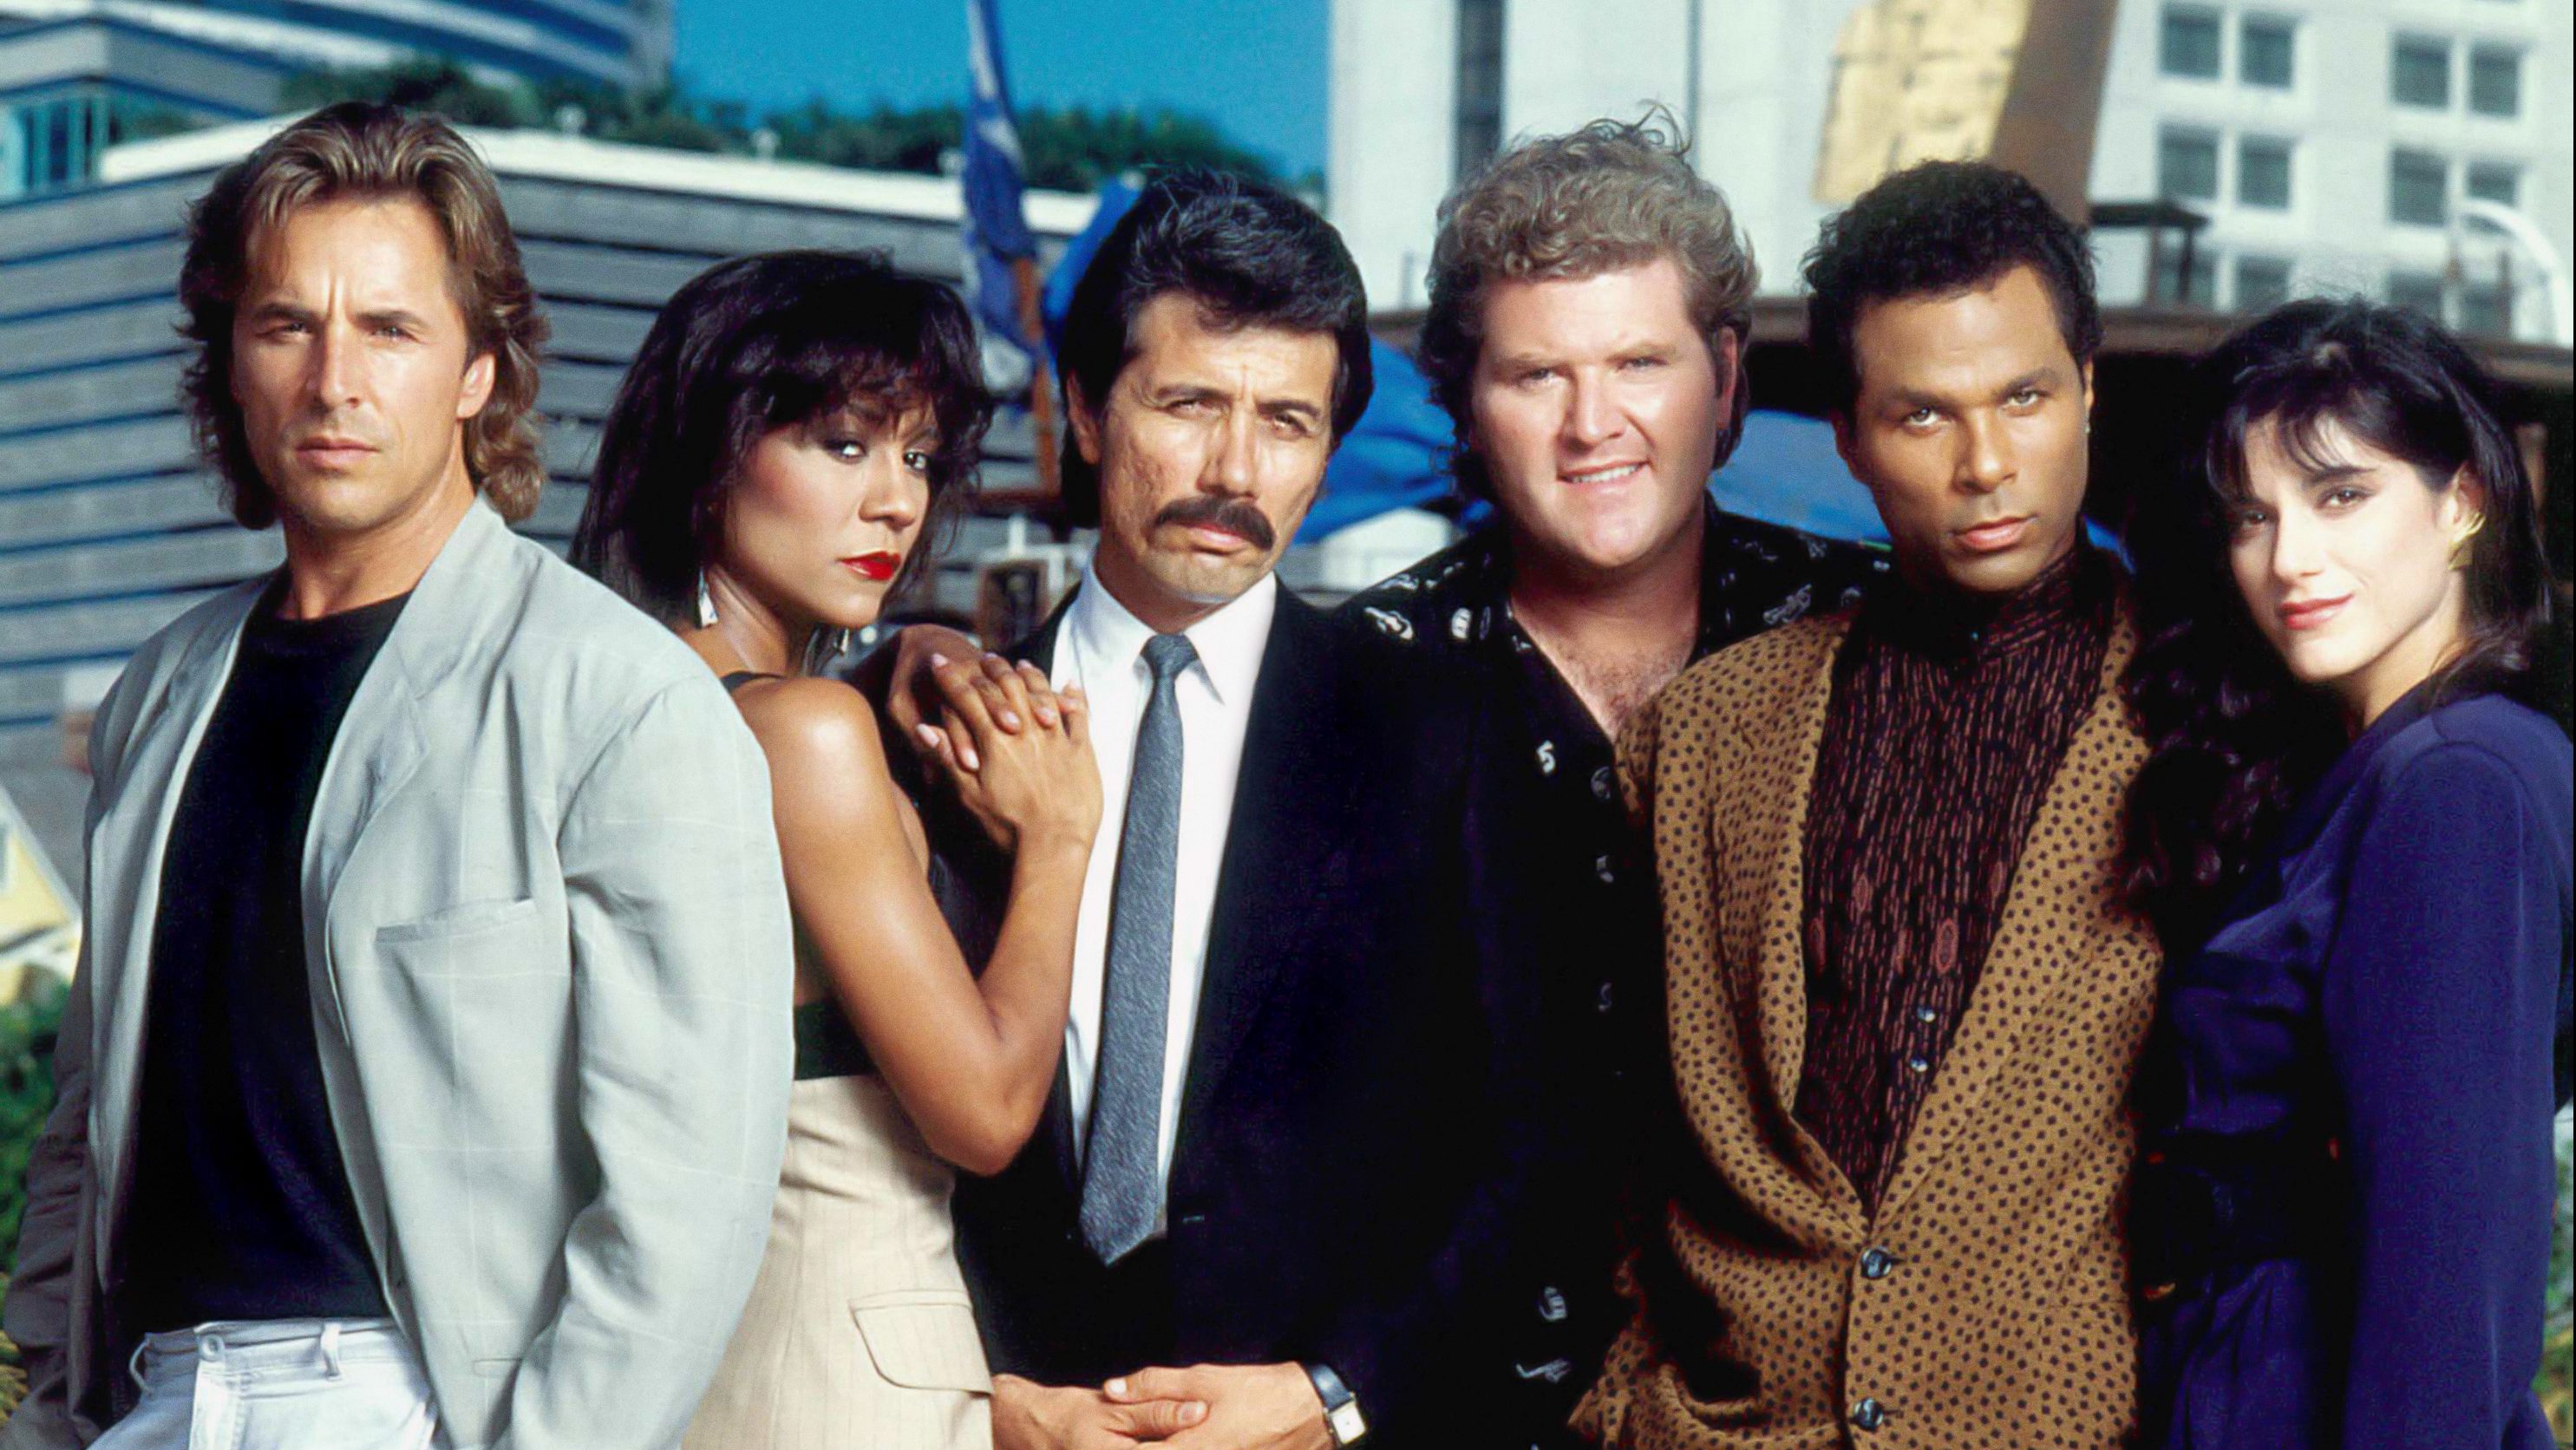 Miami Vice actors and actresses - Where are they now?